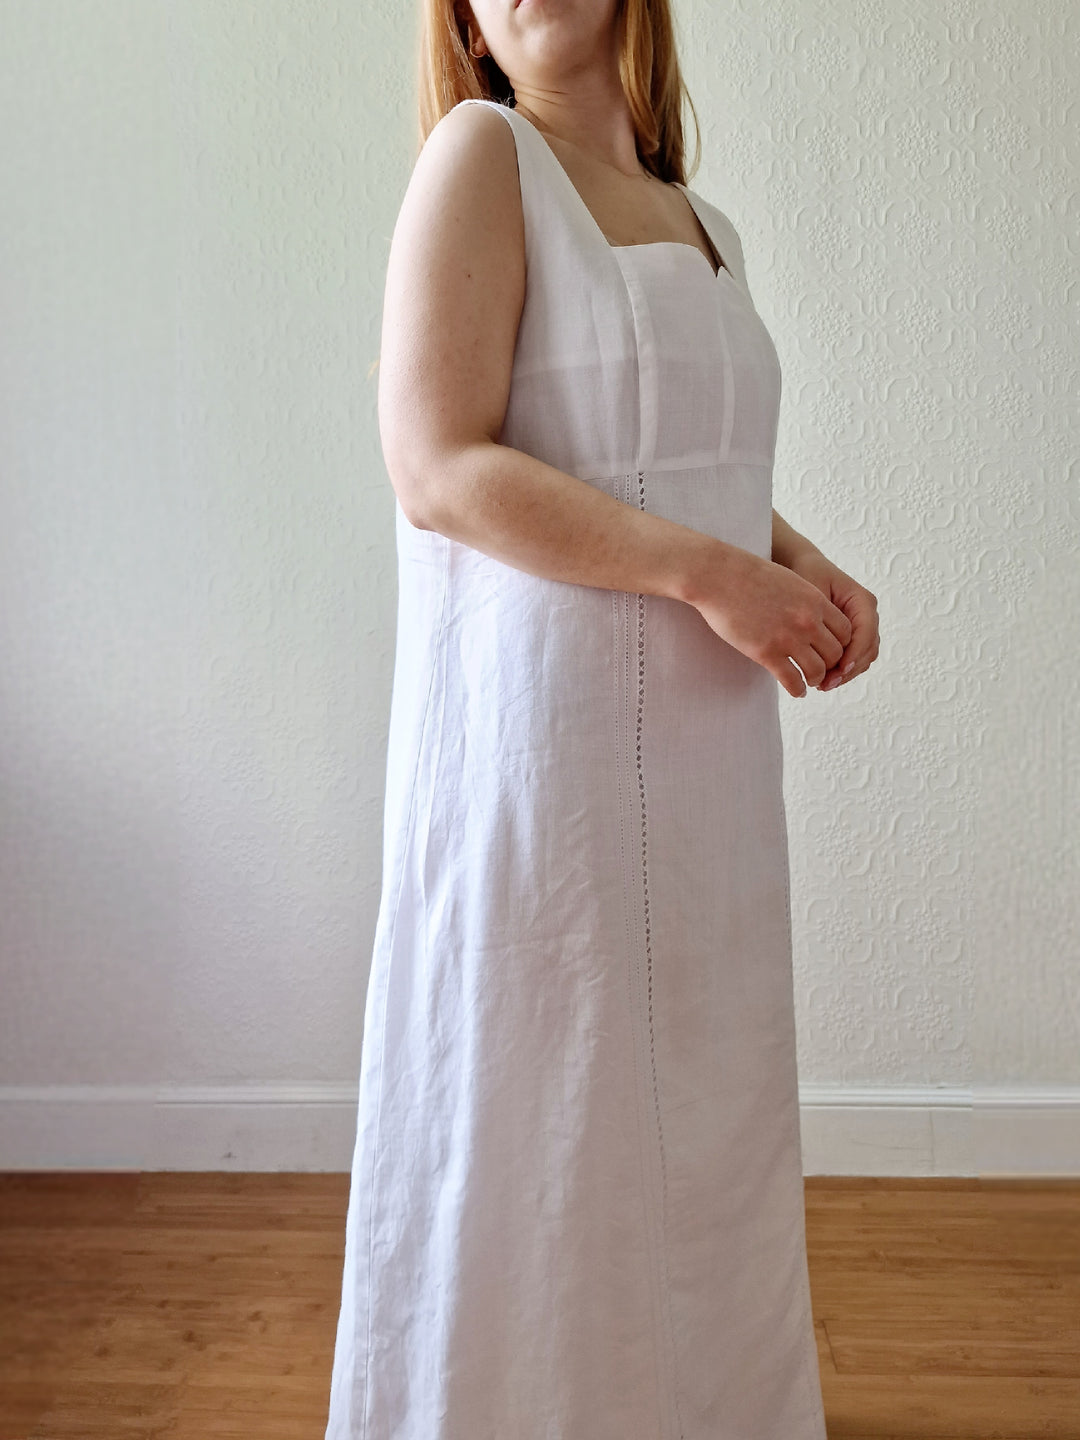 Vintage 80s White Linen Look Long Sleeveless Dress with a Square Neck - L/XL